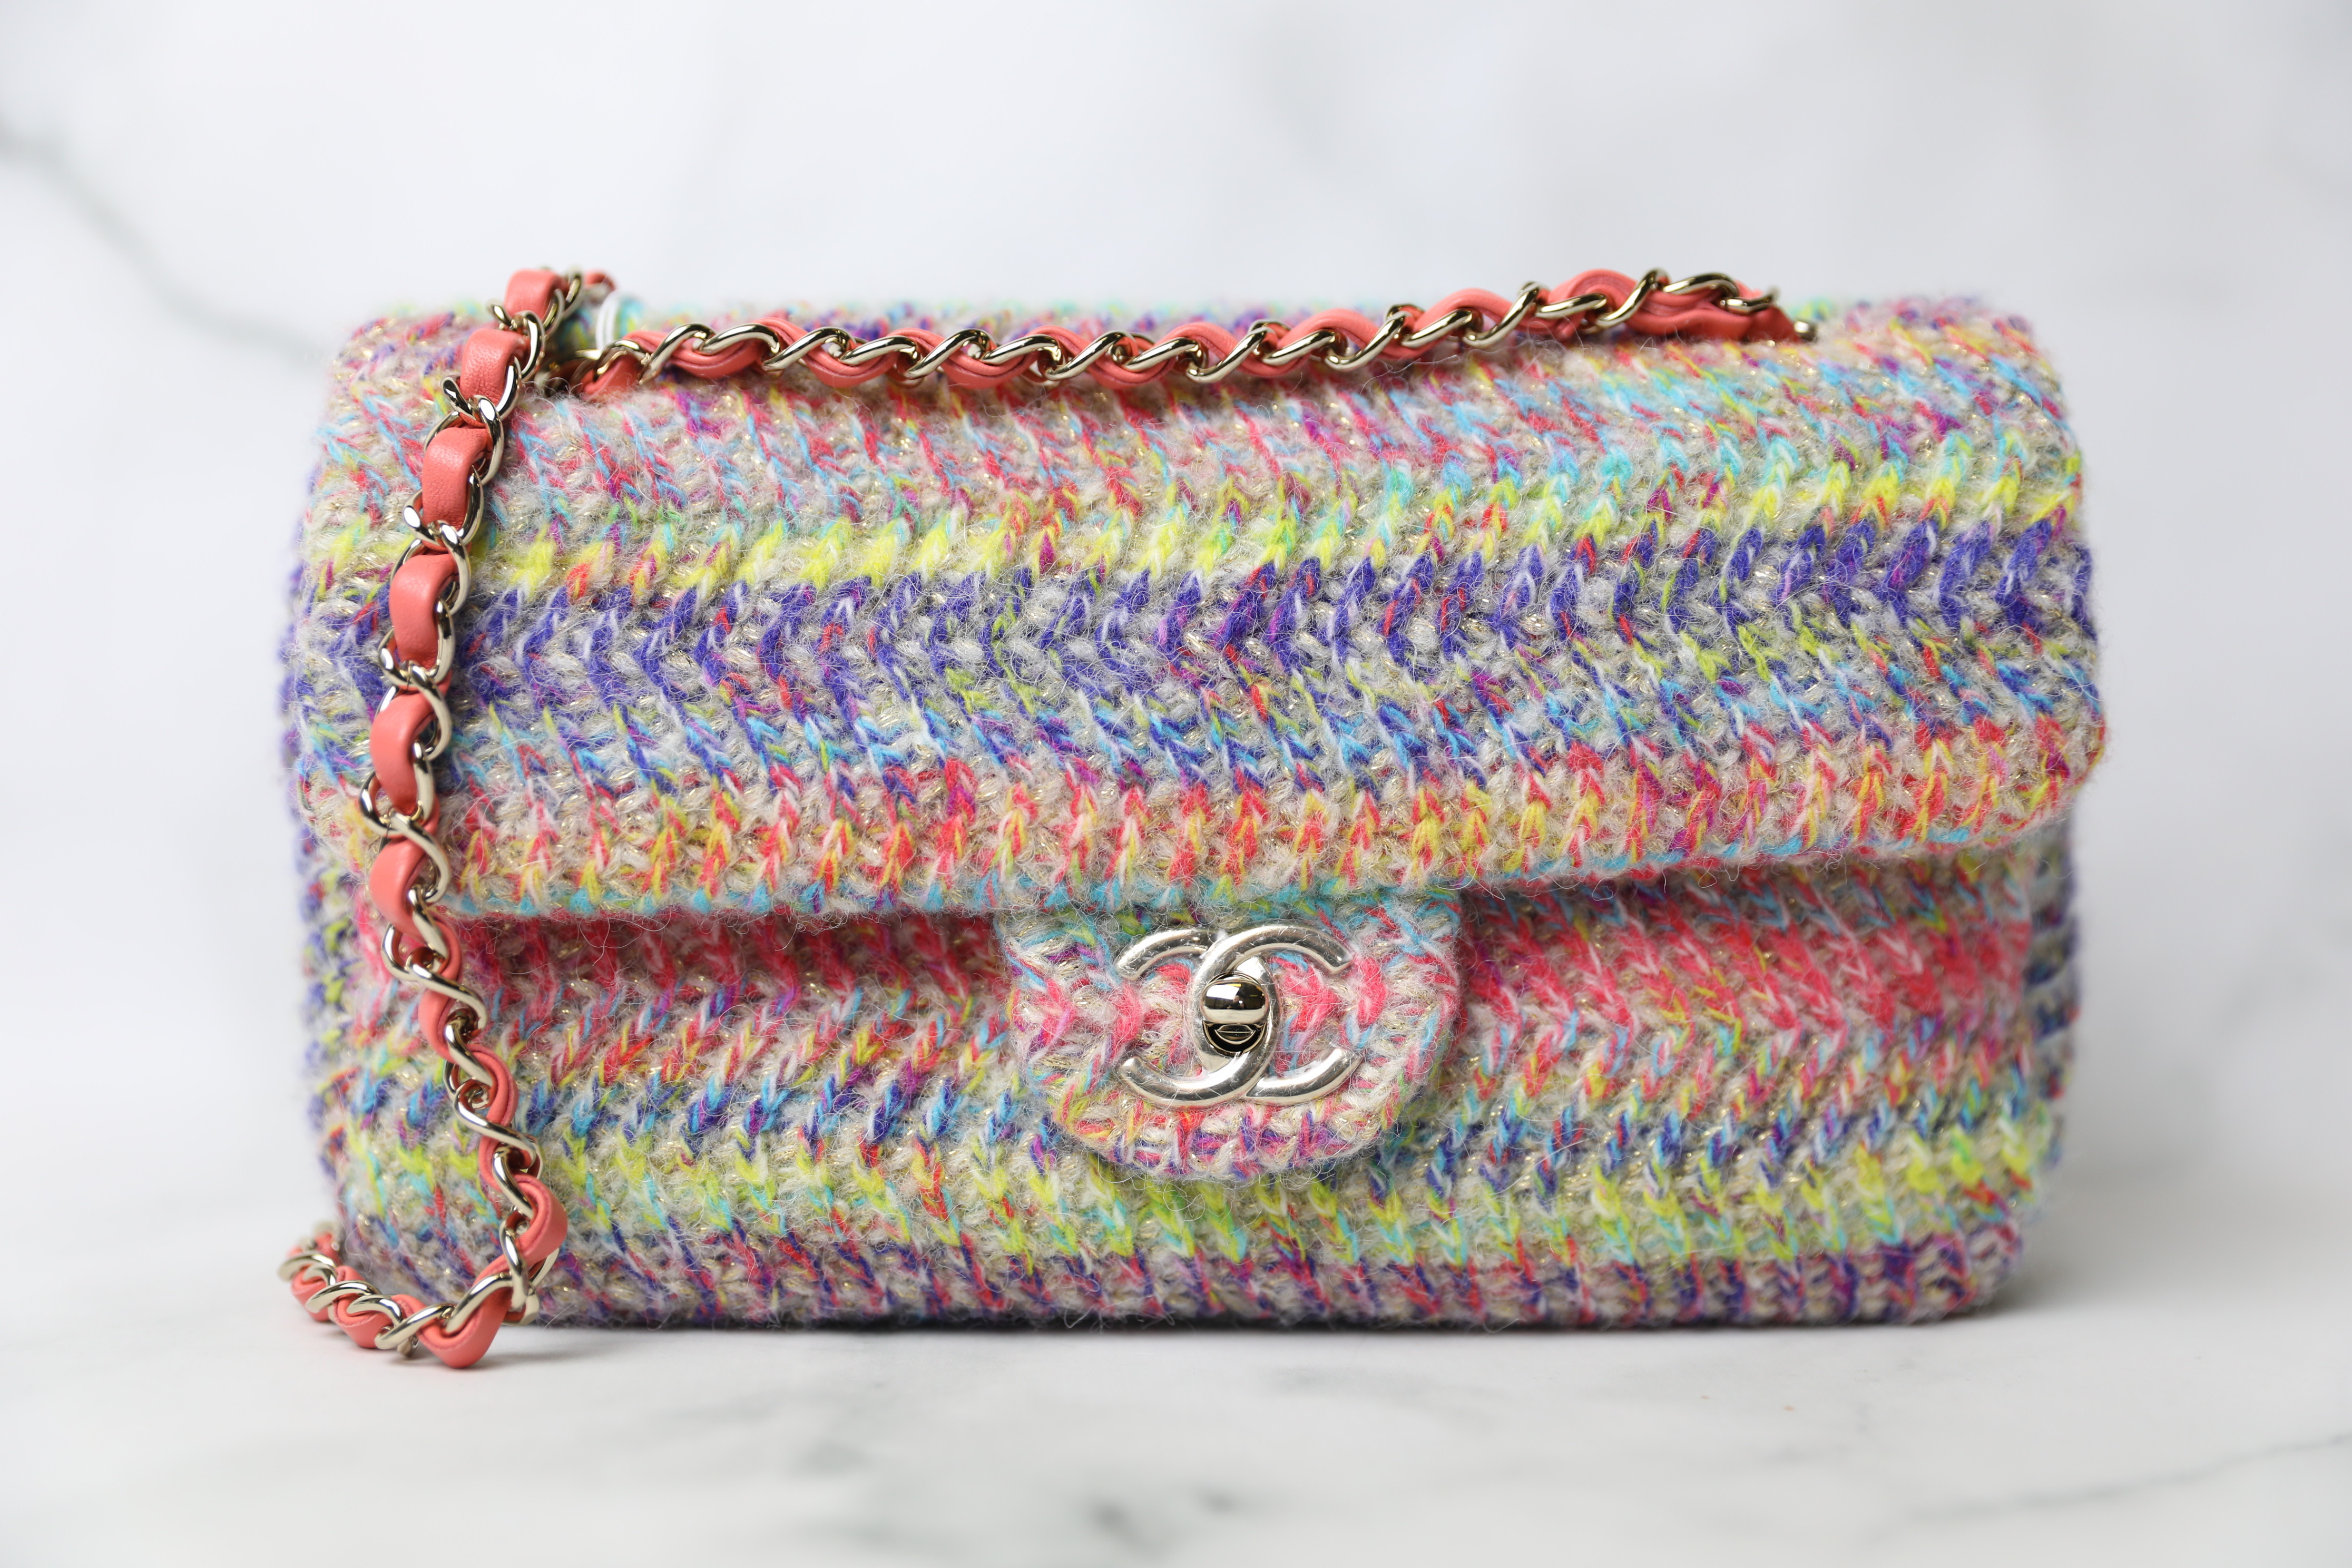 Chanel Sequin Flap, Pink Multicolor with Silver Hardware, New in Box WA001